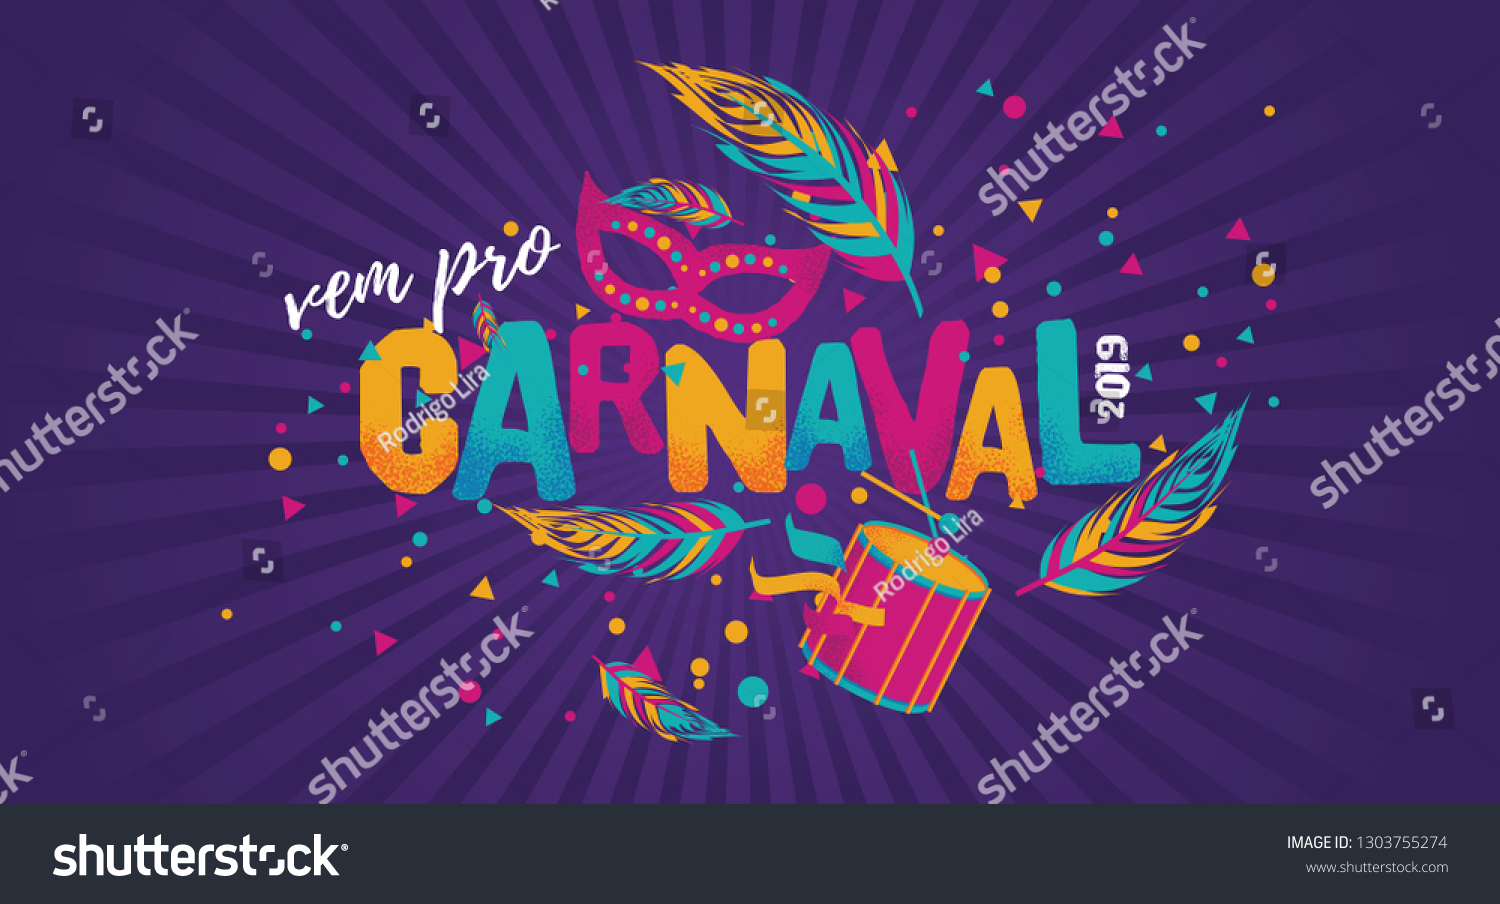 Popular Event in Brazil. Festive Mood. Carnaval Title With Colorful Party Elements Saying Come to Carnival. Travel destination. Brazilian Rythm, Dance and Music. #1303755274